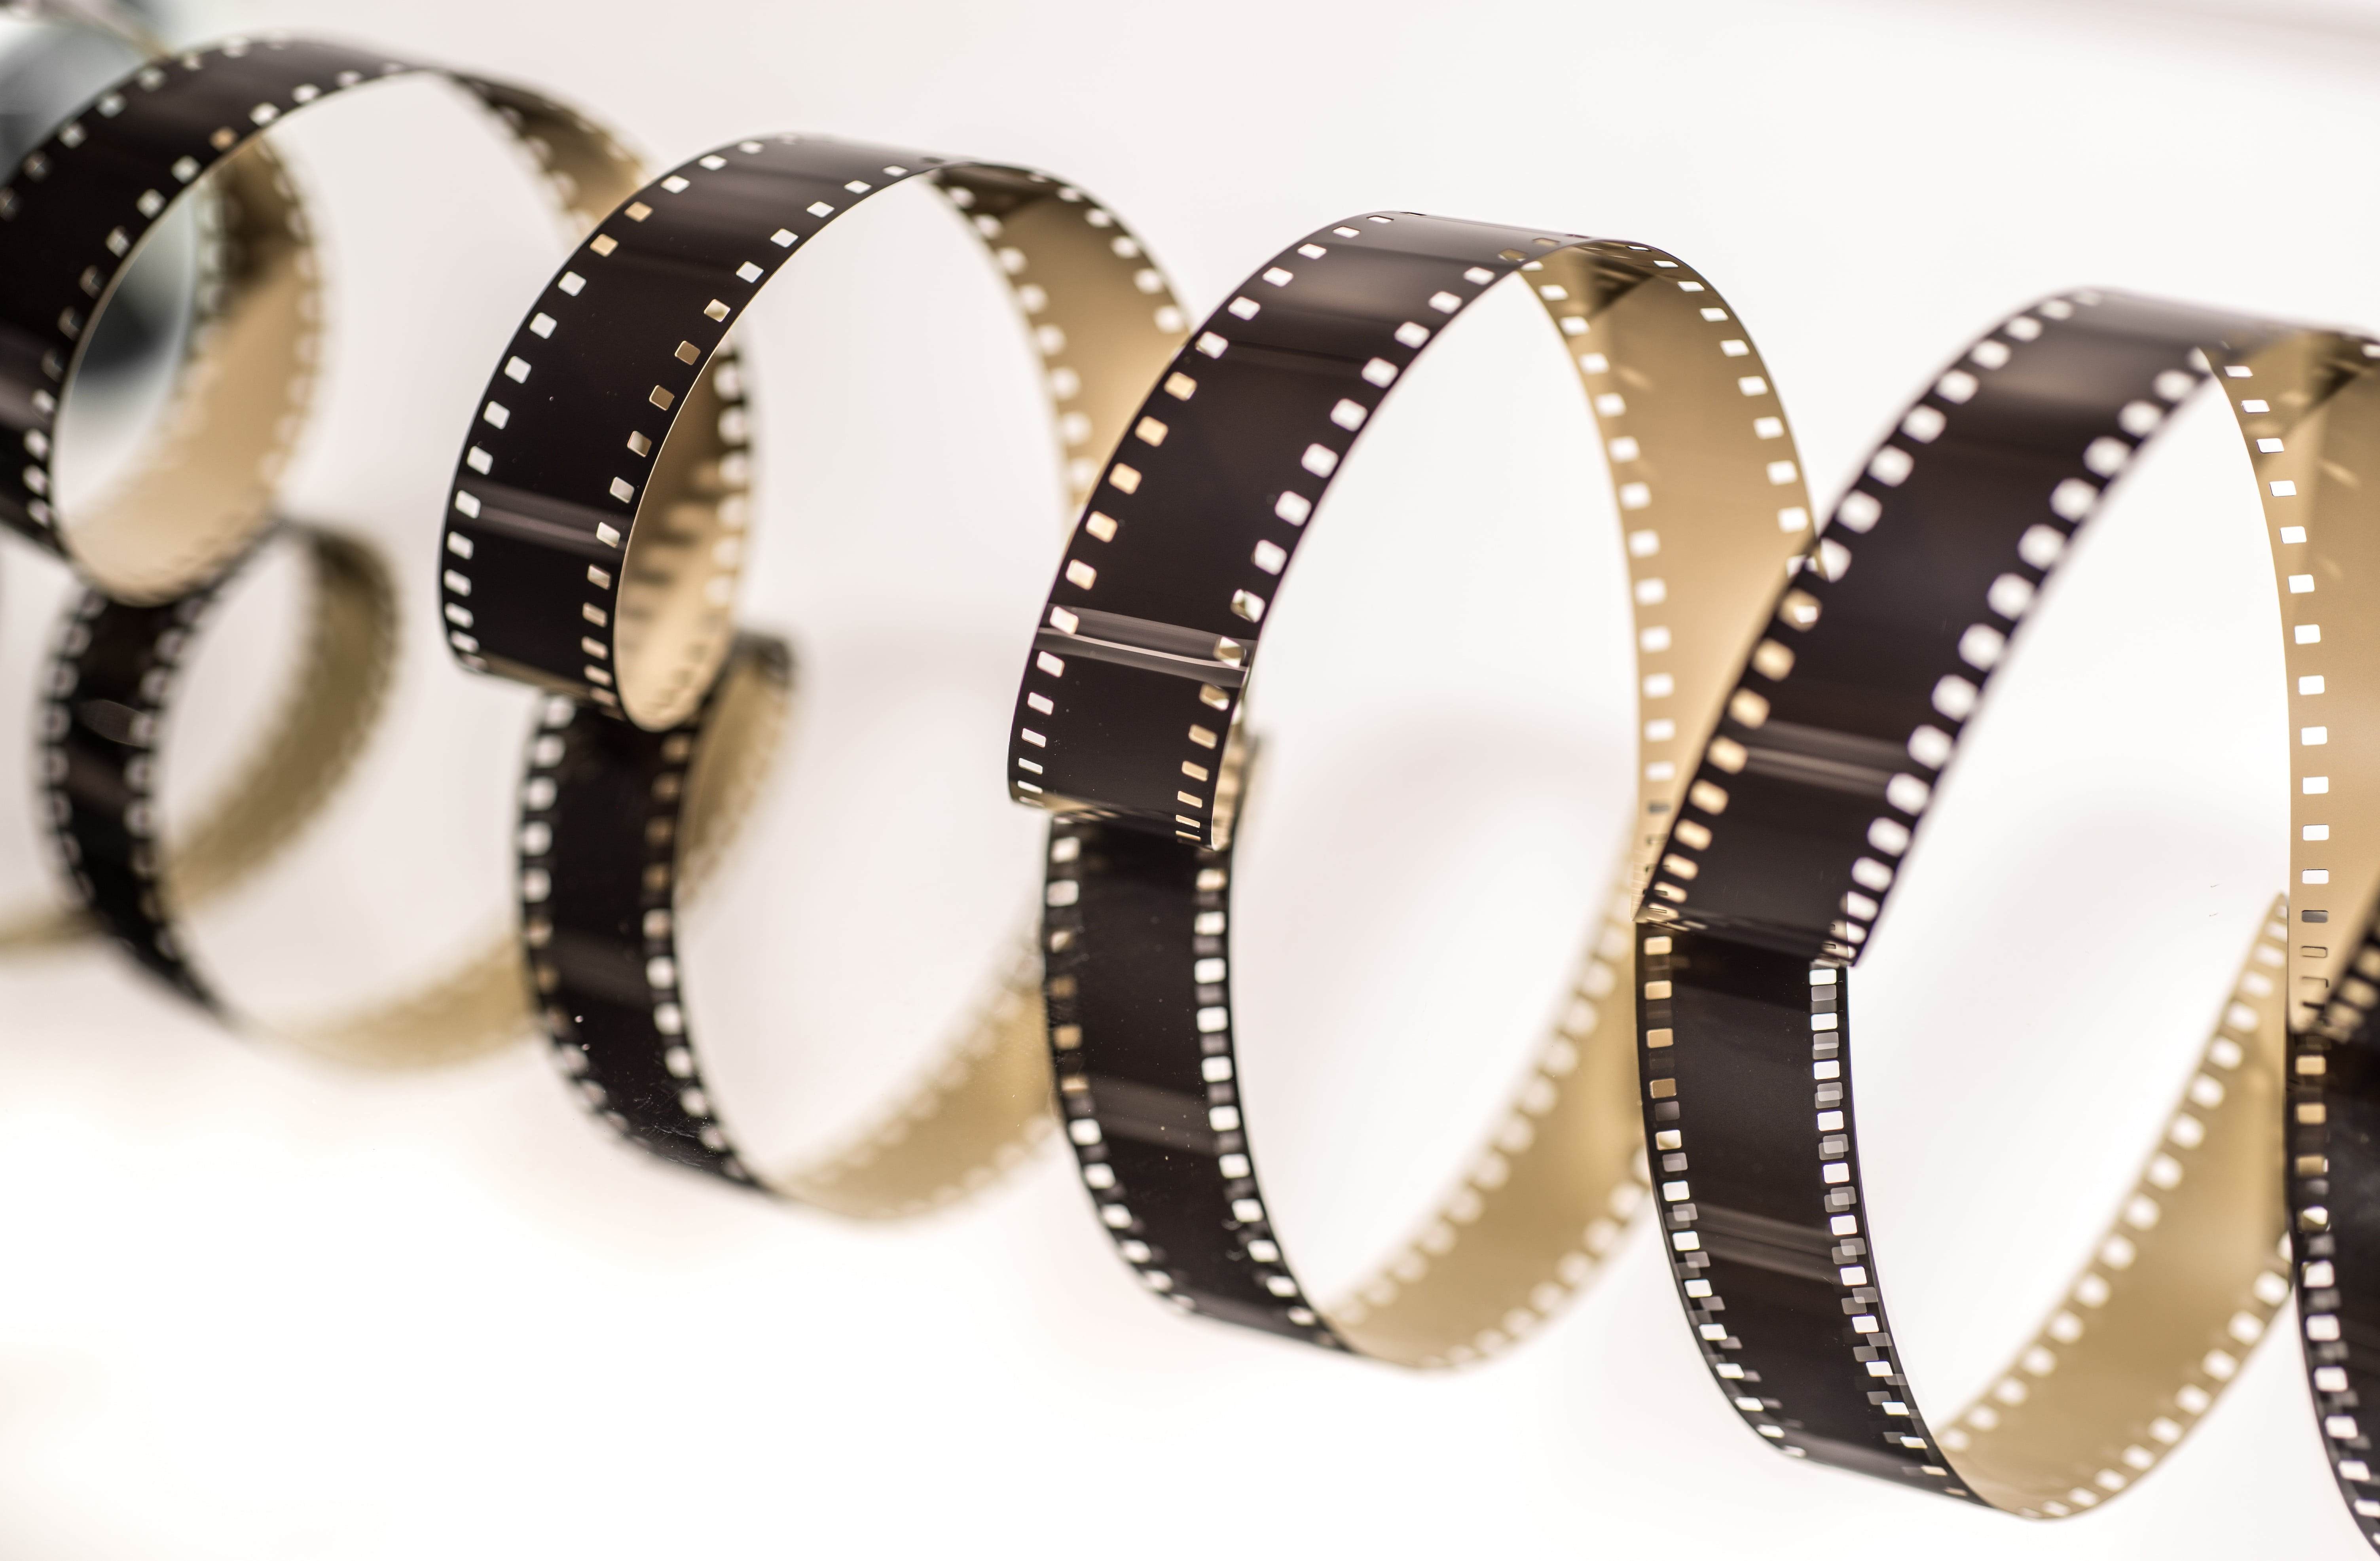 840 Movie Theater Film Projector Reel Stock Photos - Free